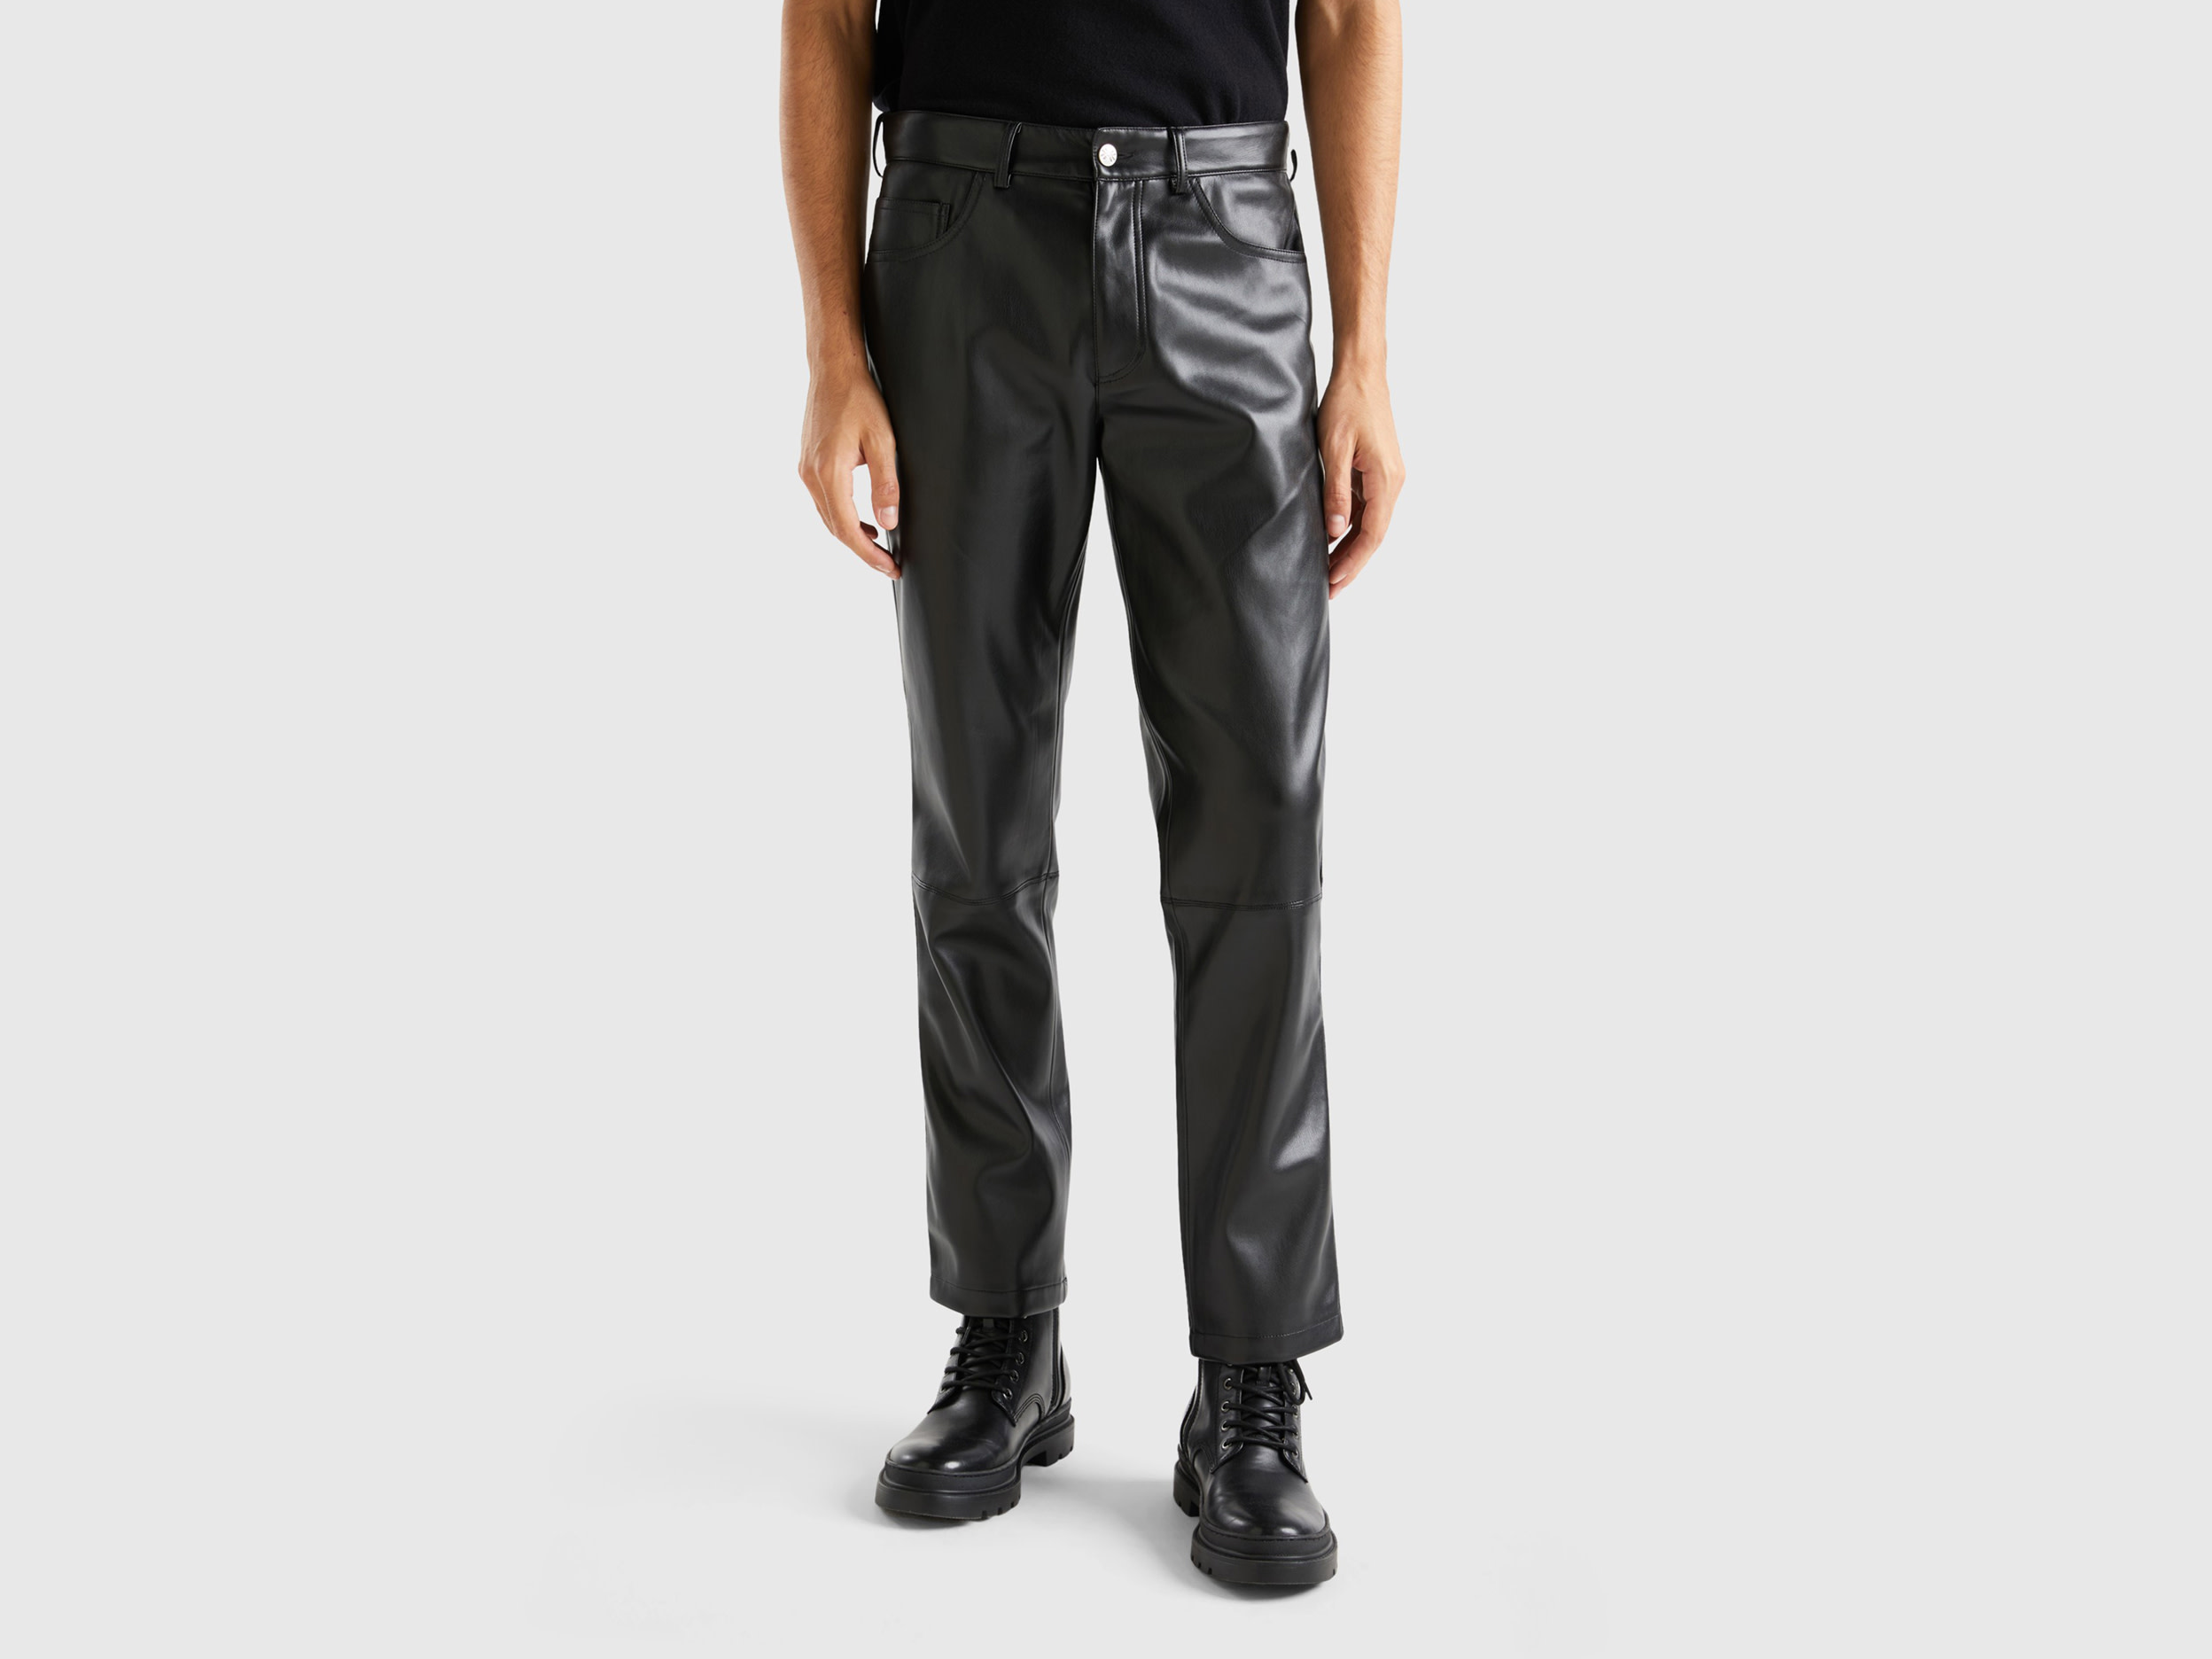 Benetton, Trousers In Imitation Leather Fabric, size 44, Black, Men